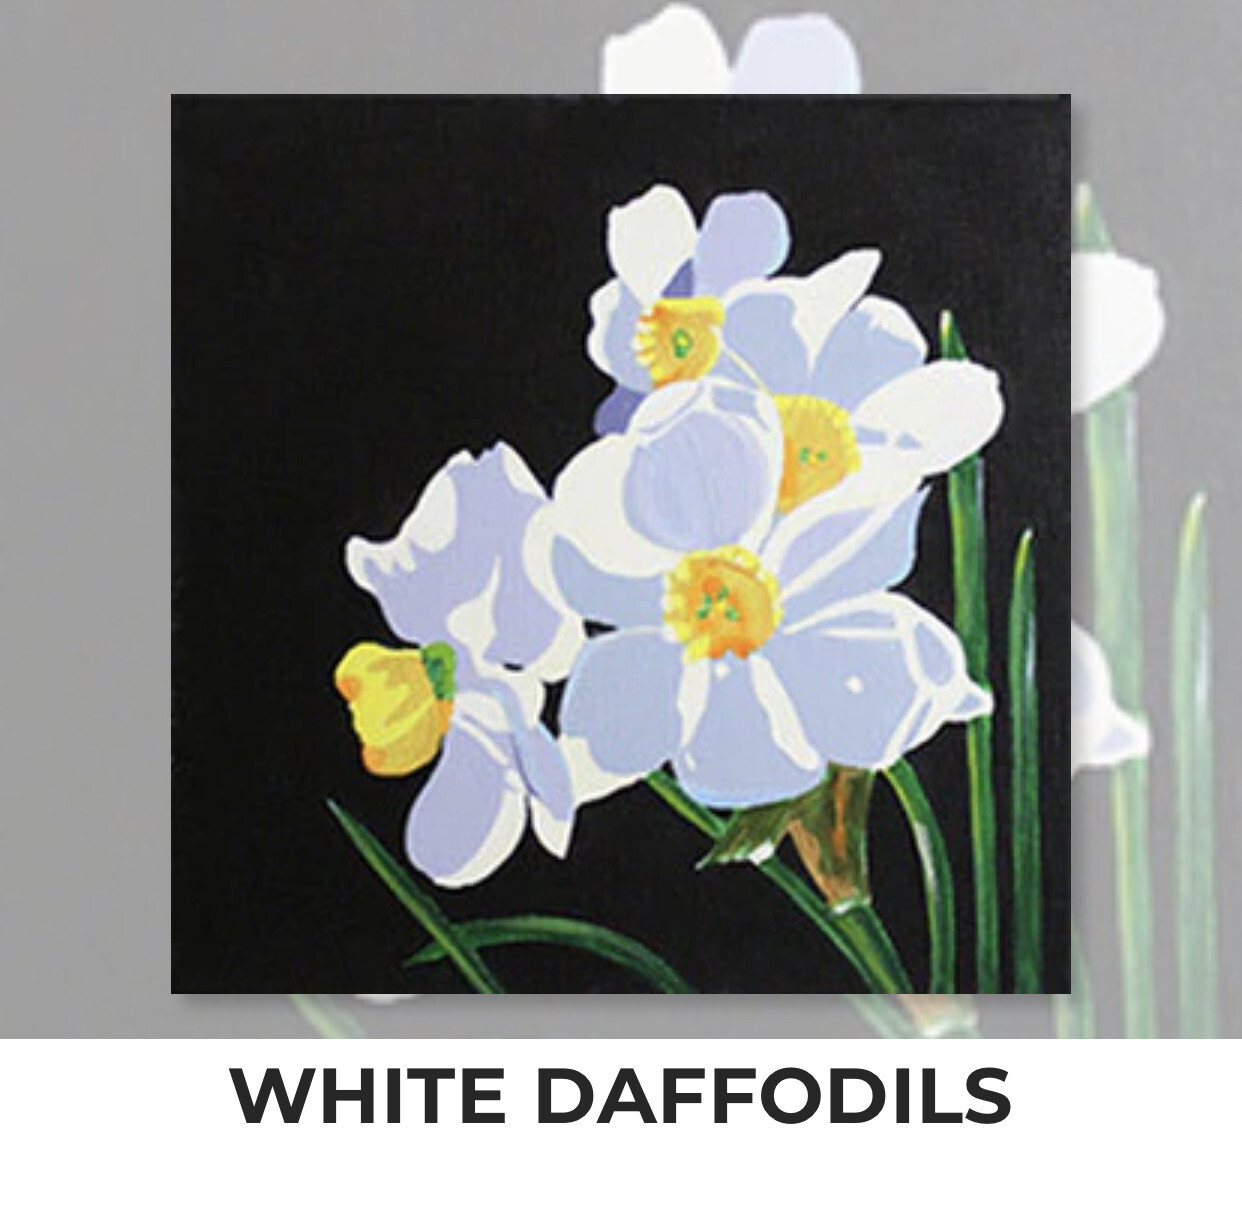 White Daffodils ADULT OR TWEEN Acrylic Paint On Canvas DIY Art Kit - 3 Week Special Order